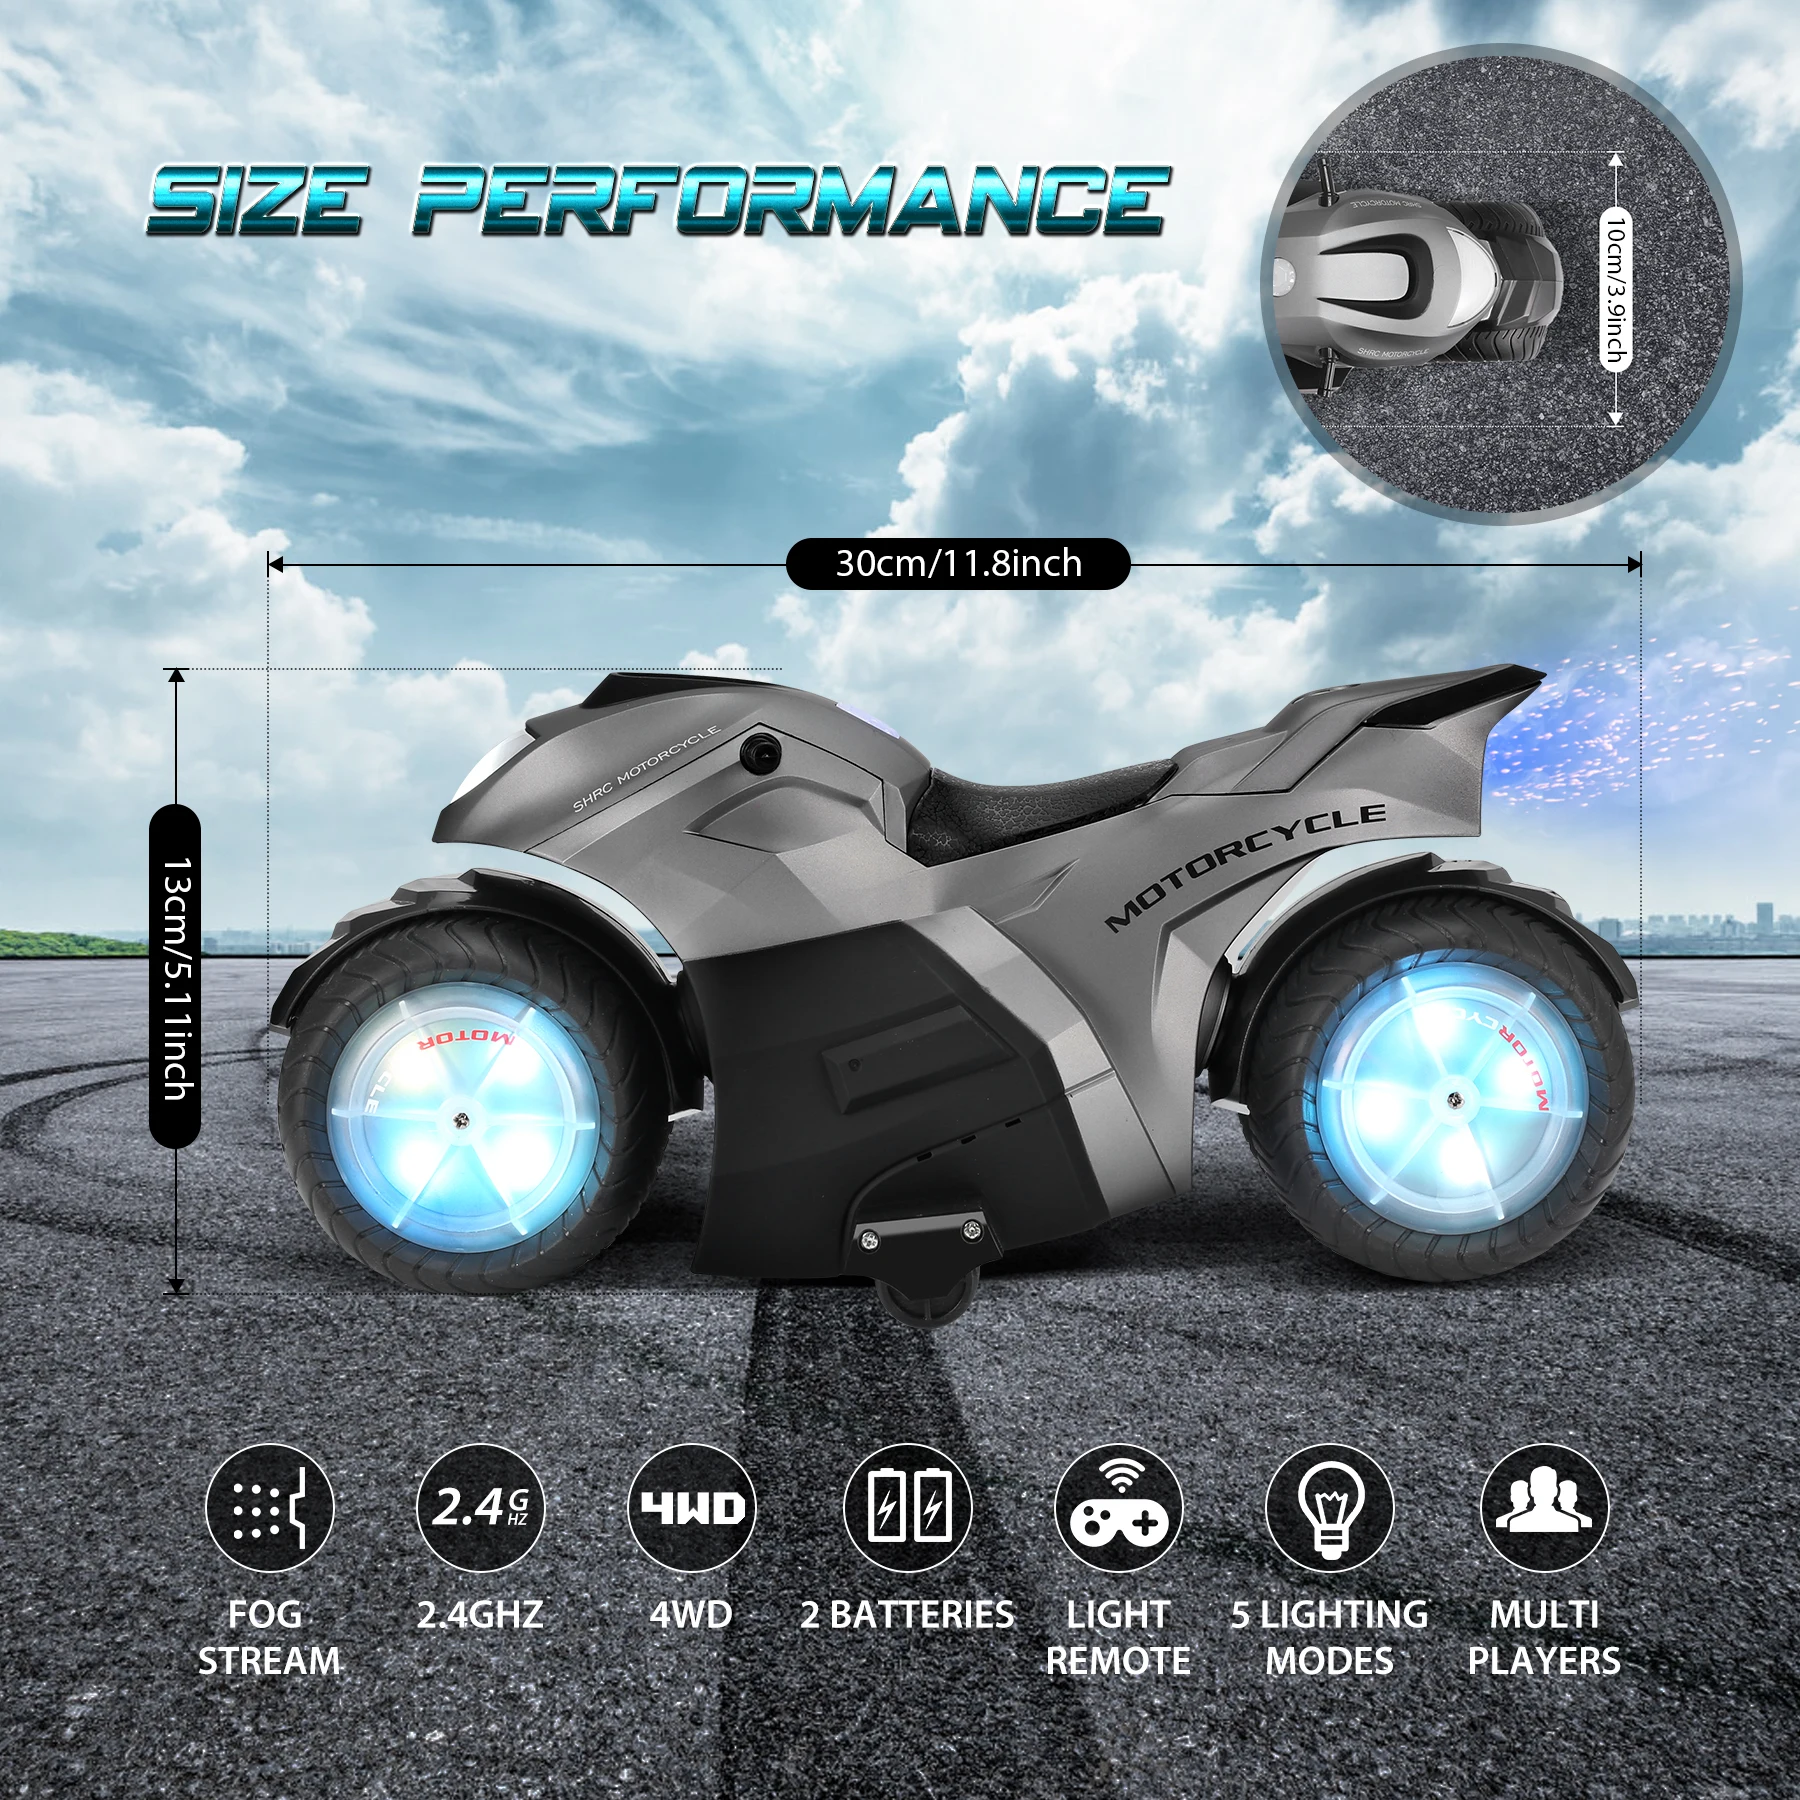 RC Motorcycle for Kids,Remote Control Car Toy for Boy and Girl,360° Spinning Action Rotating Drift Stunt Motorbike,2WD High Speed,Two Rechargeable Battery,Birthday for Kids 